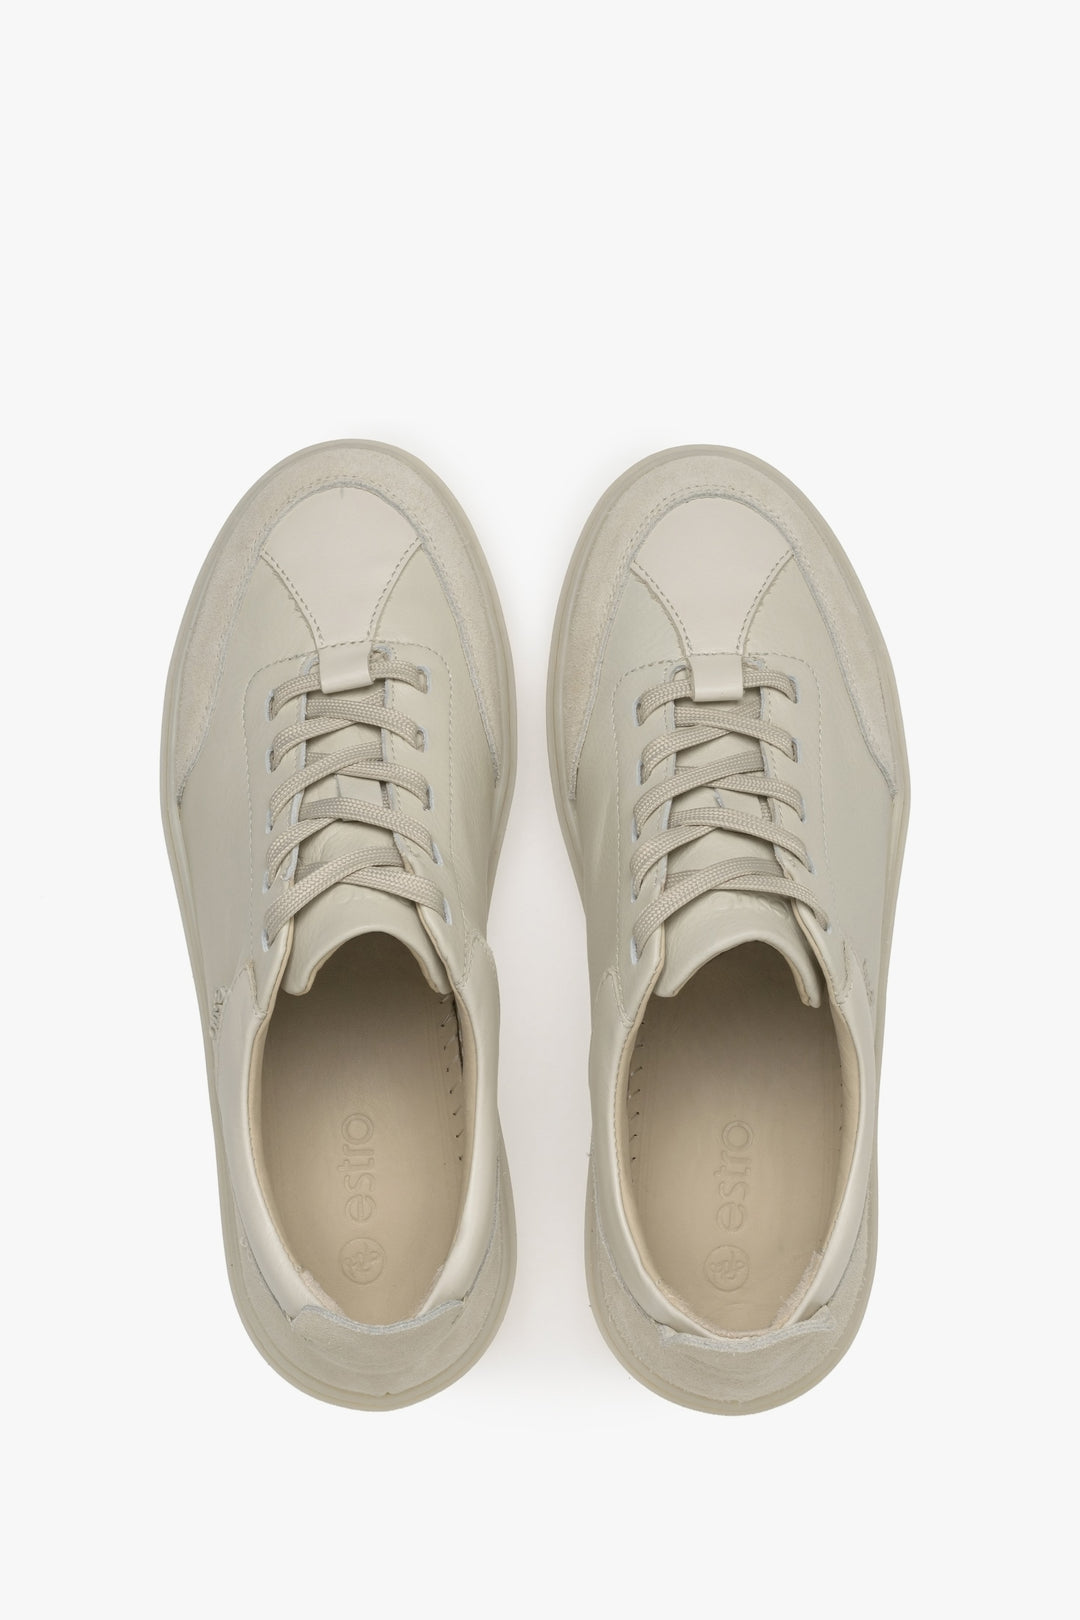 Estro women's sneakers in beige with leather and velour - top view presentation.